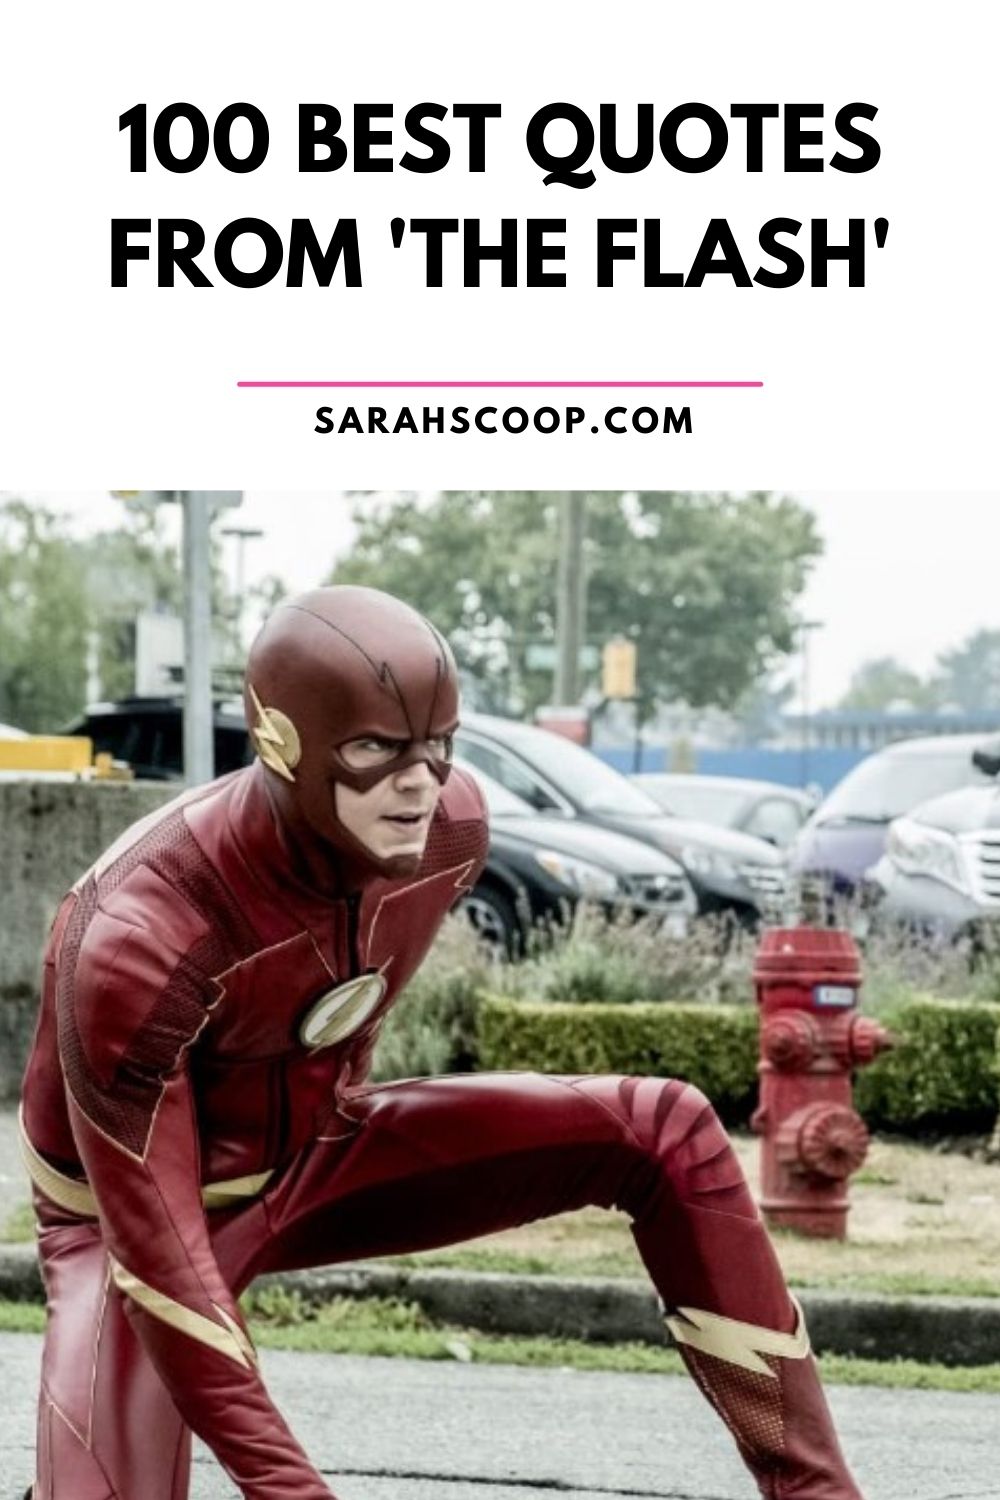 100 Best Quotes from 'The Flash' - Sarah Scoop